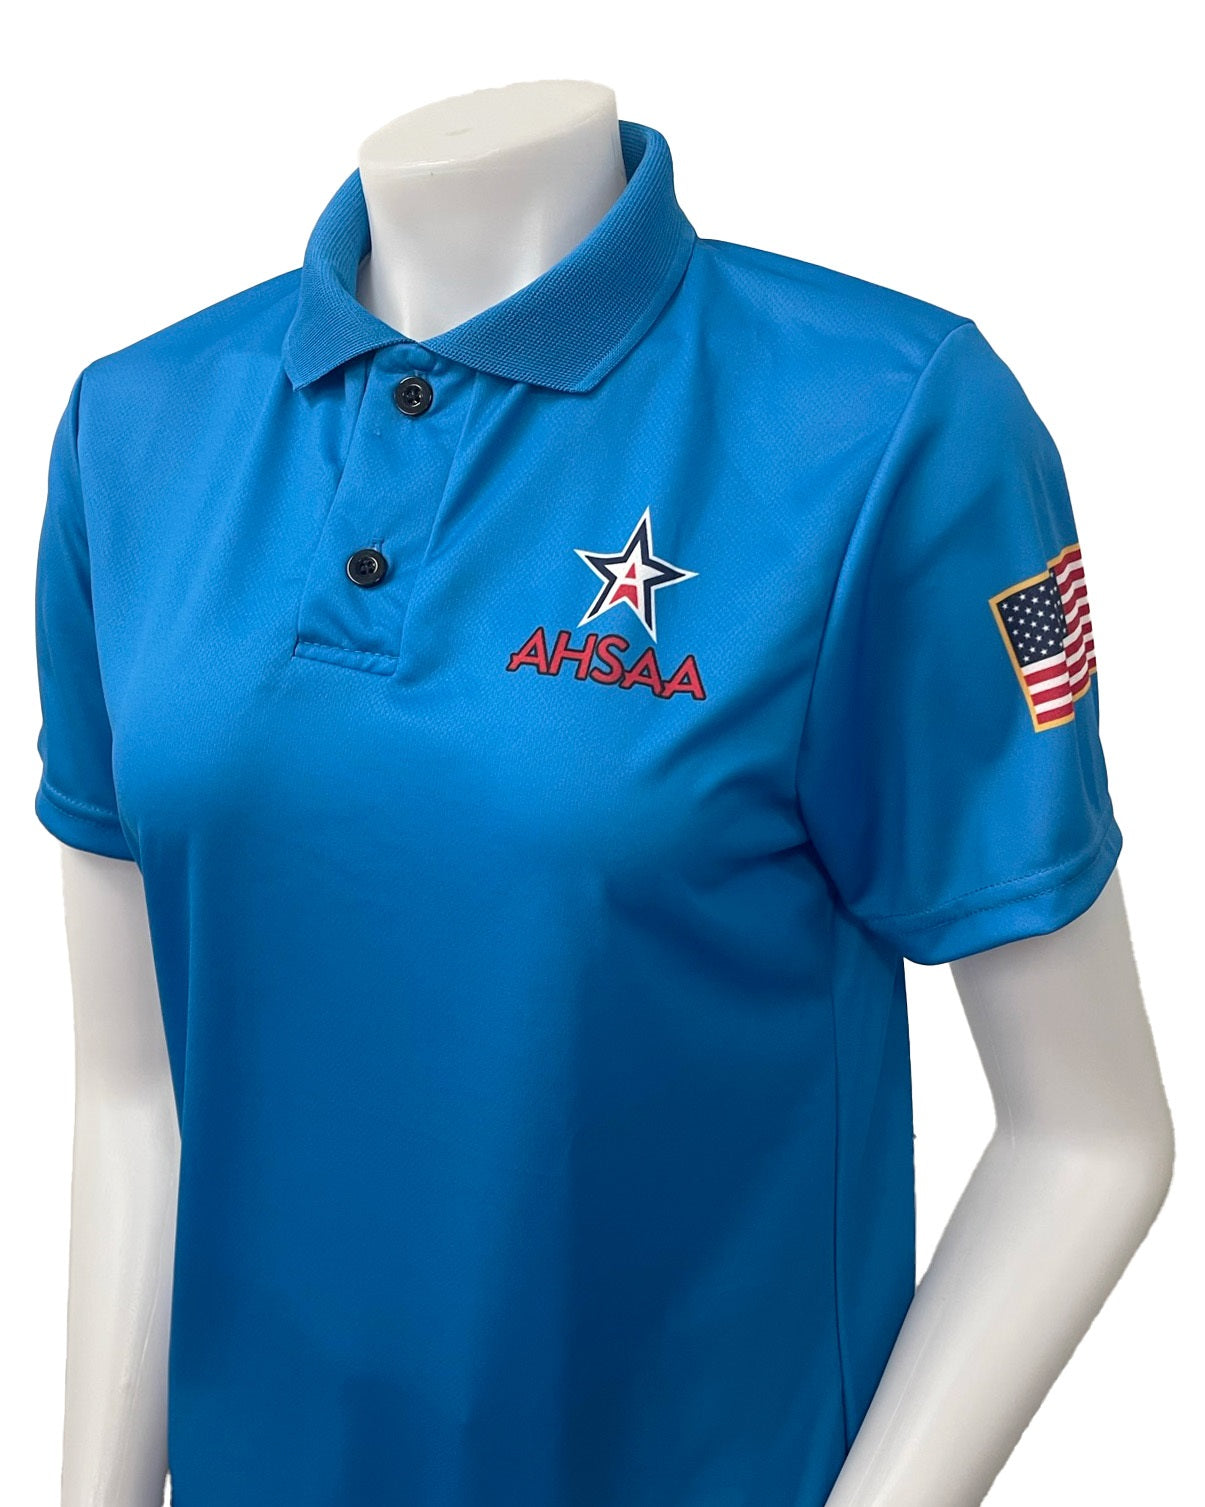 USA452AL - Smitty "Made in USA" - Bright Blue - Track Women's Short Sleeve Shirt